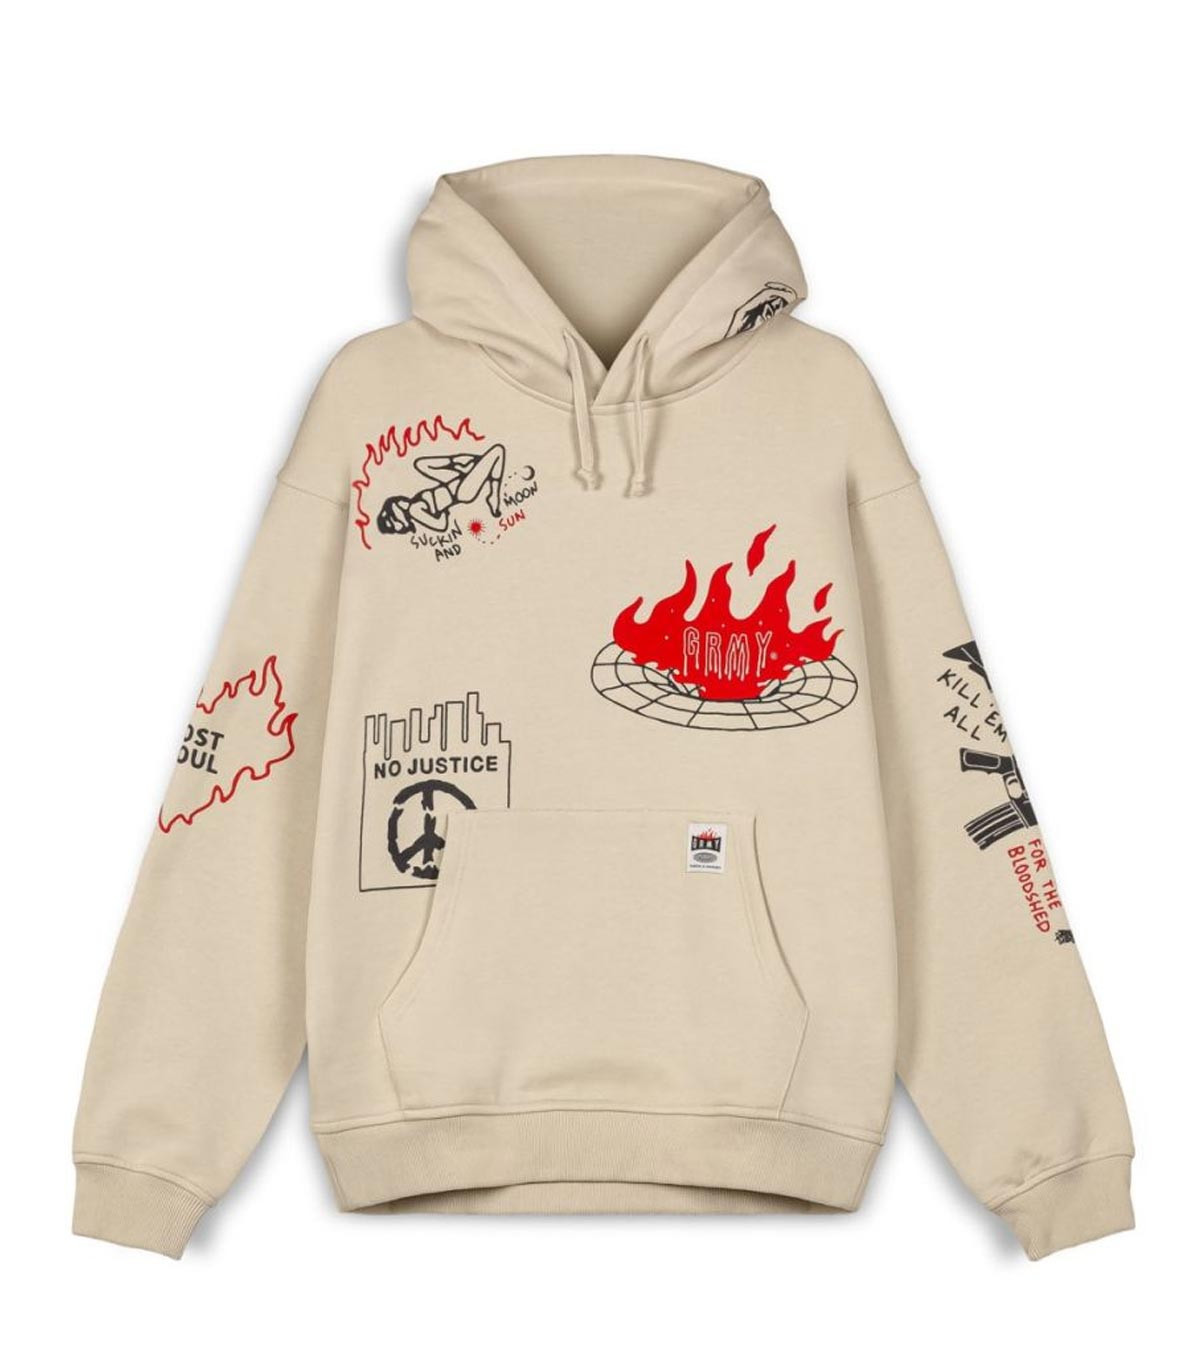 Grimey - Sudadera con Capucha "Back At You Wide Hole" - Beige